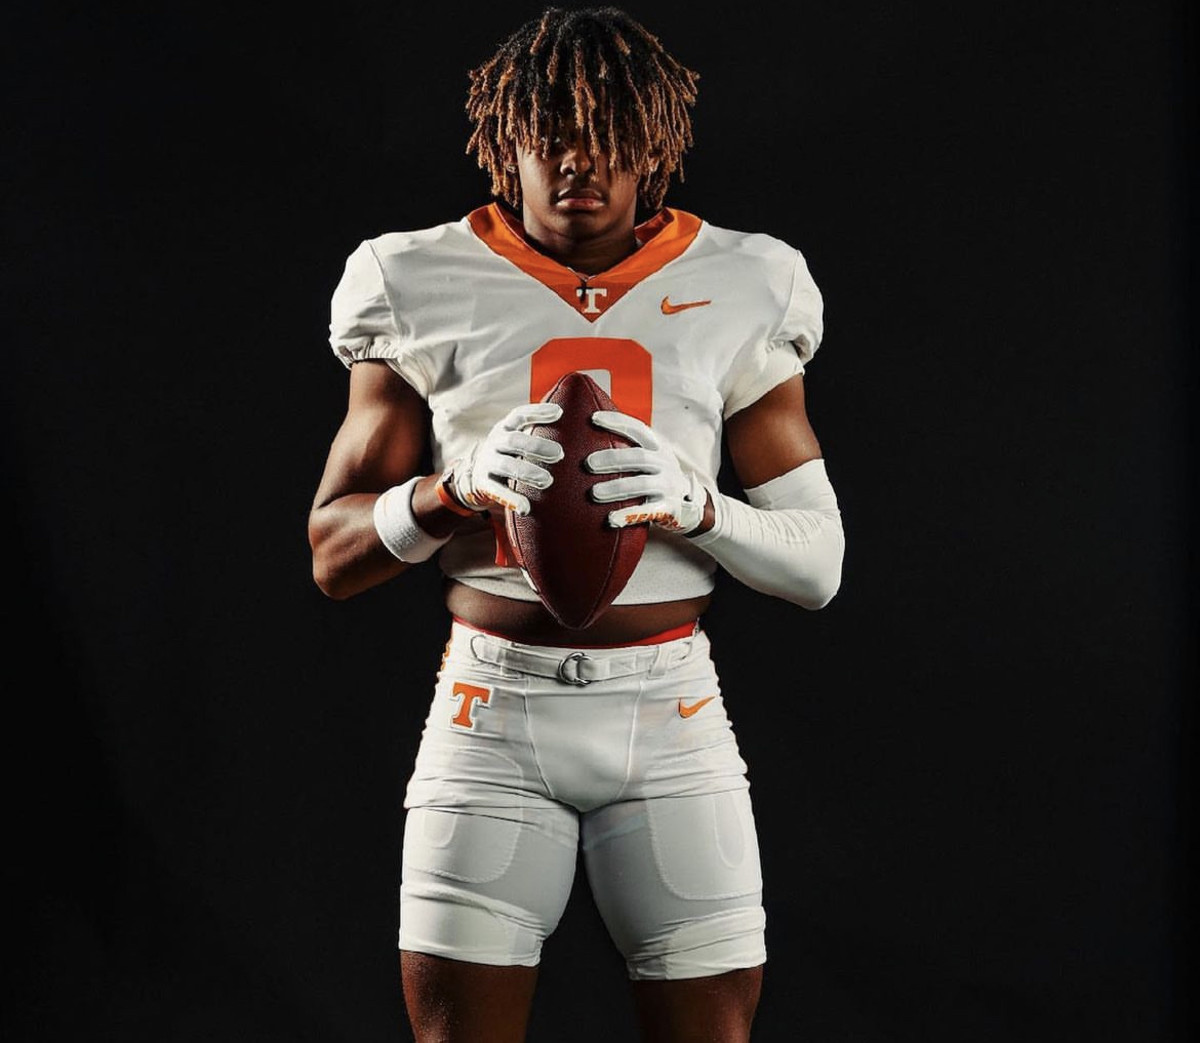 2025 Tennessee Volunteers CB commit Dylan Lewis during an unofficial visit to Tennessee. (Photo courtesy of Dylan Lewis)